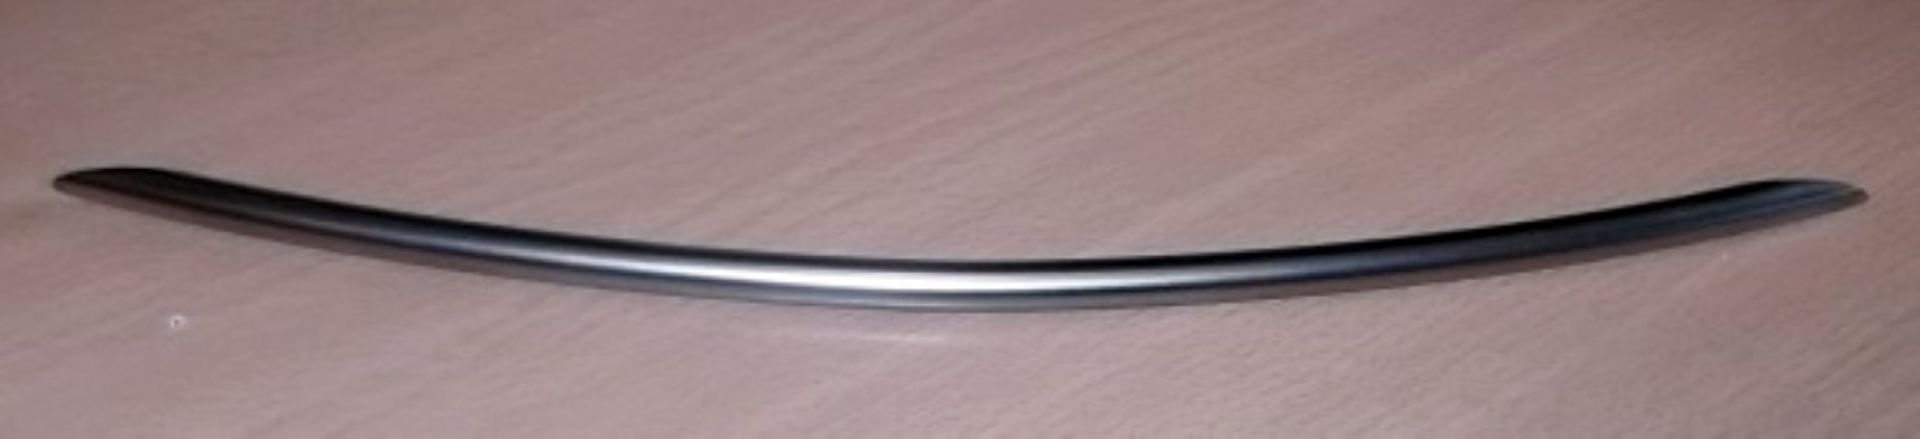 400 x BOW Handle Kitchen Door Handles By Crestwood - 320mm - New Stock - Brushed Nickel Finish - - Image 3 of 10